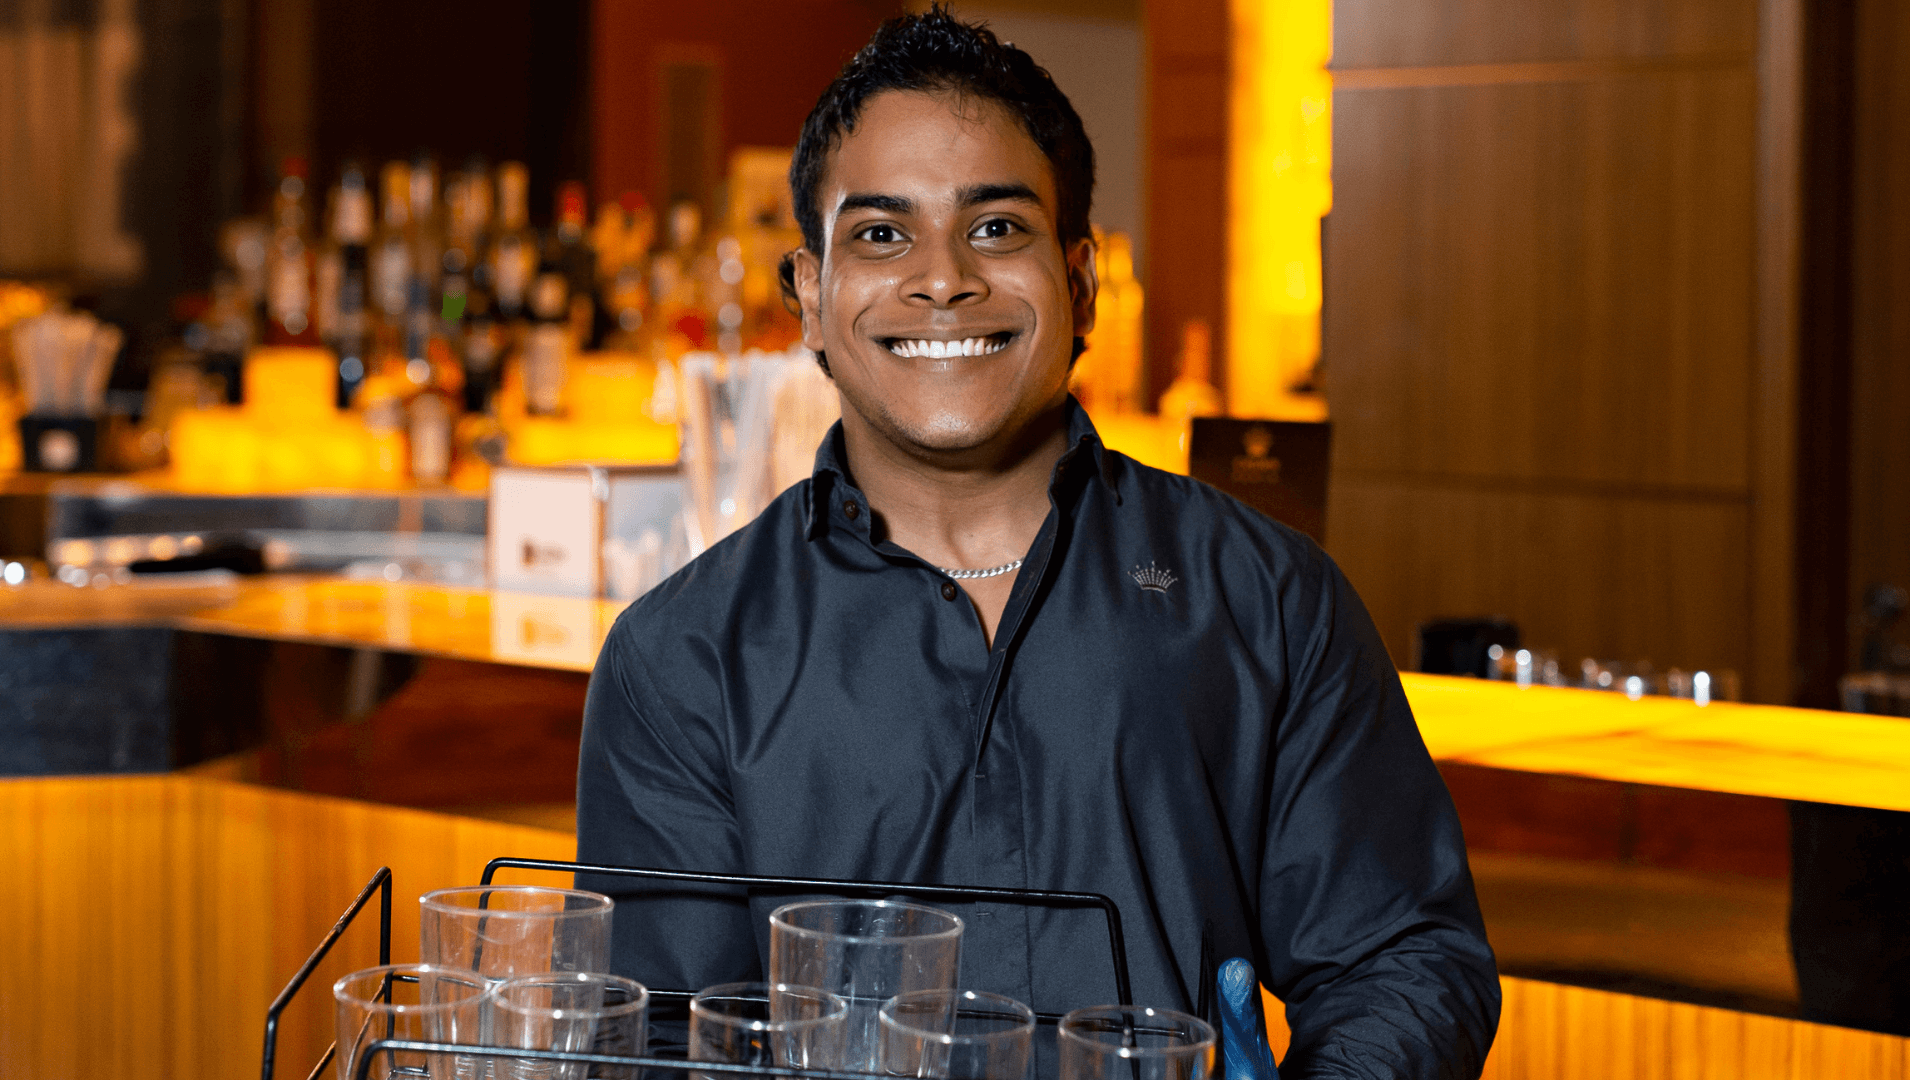 man smiling in a bar setting